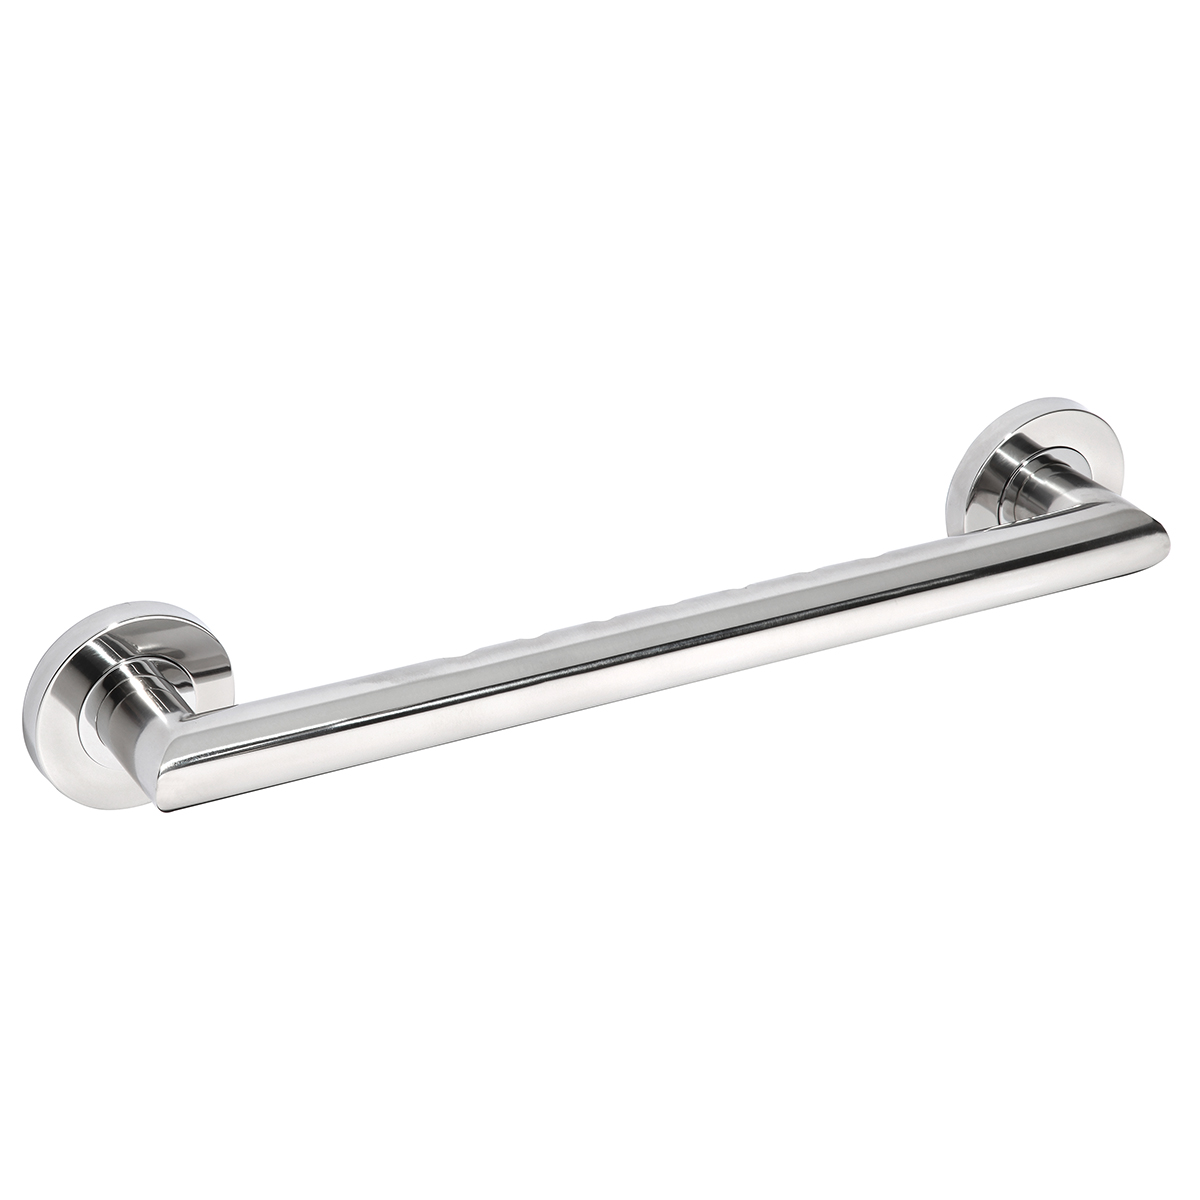 Astral - Grab Bar - 16" - Polished Stainless Steel